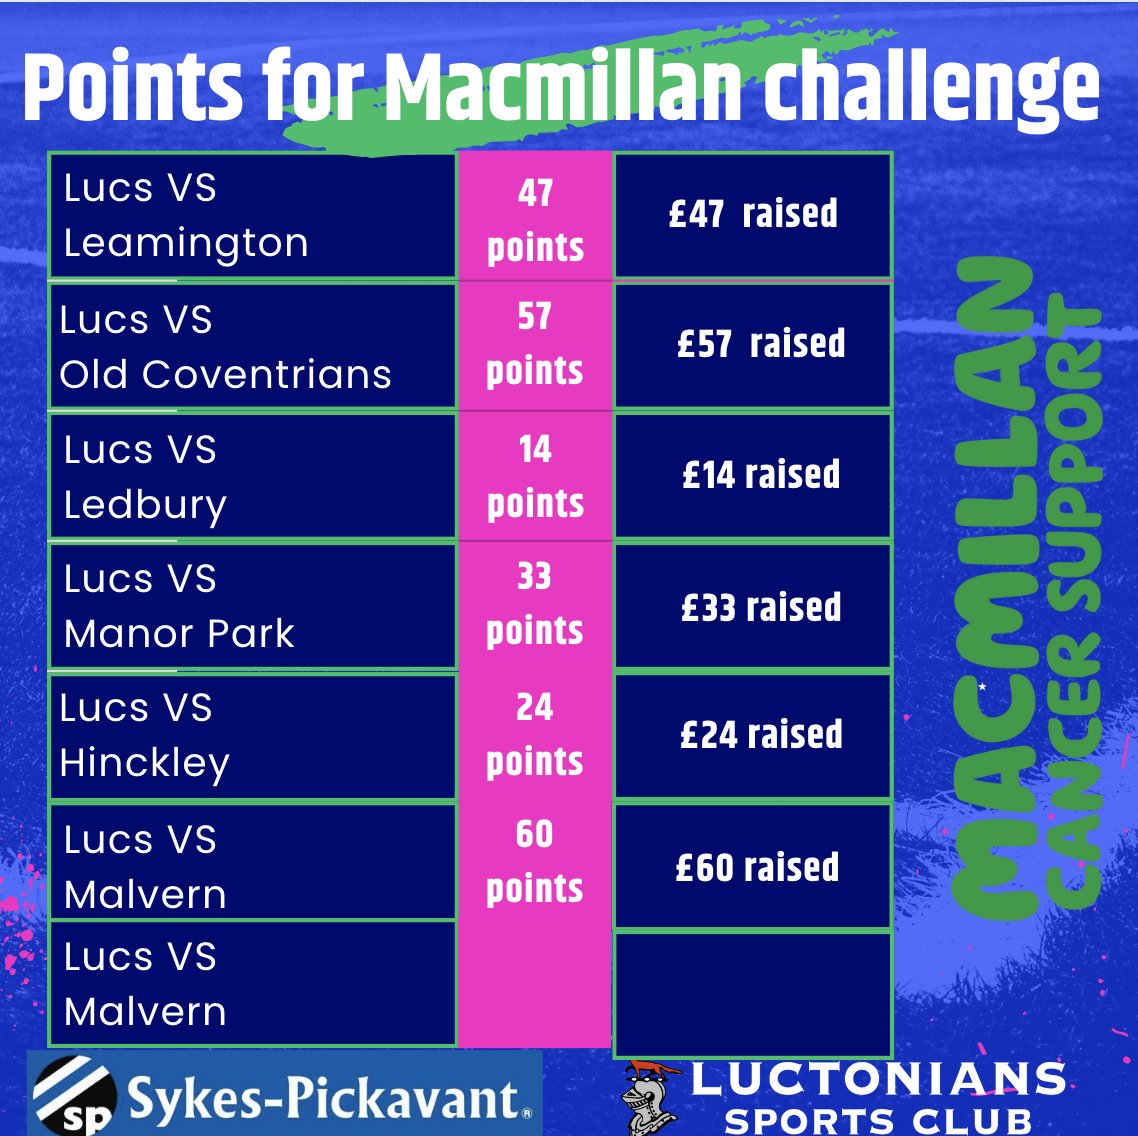 The weekend results are in: @Luctonians 2NDs 60 - 14 Malvern RFC. Smashing win by the boys. They managed to raise £60 for @macmillancancersupport - an amazing donation to an amazing cause! Their final match of the season is next weekend, we wish them luck.